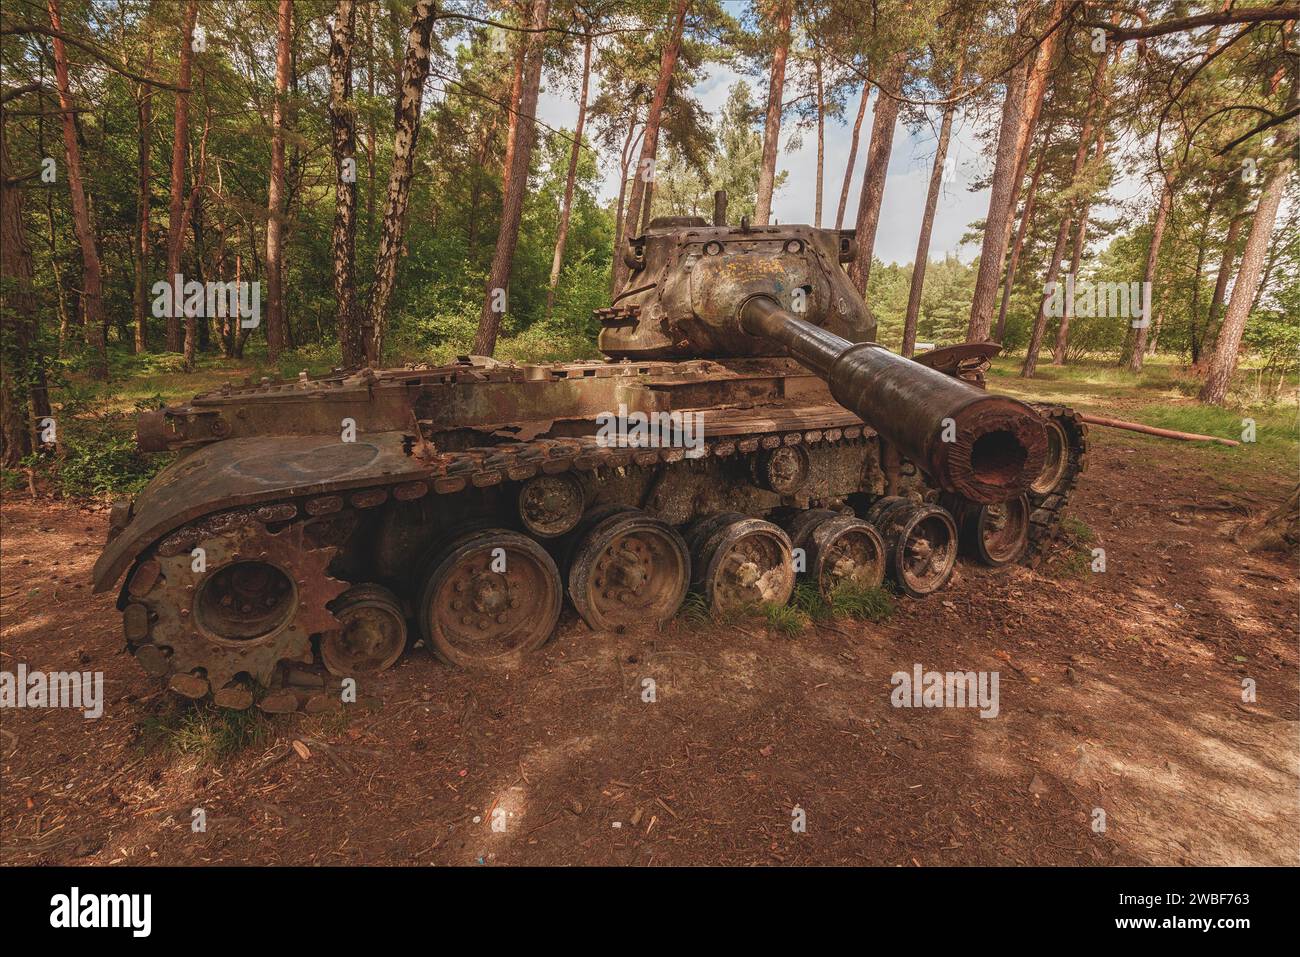 Old tank in the forest with sunbeams shining through the trees, M47 Patton, Lost Place, Brander Wald, Aachen, North Rhine-Westphalia, Germany Stock Photo